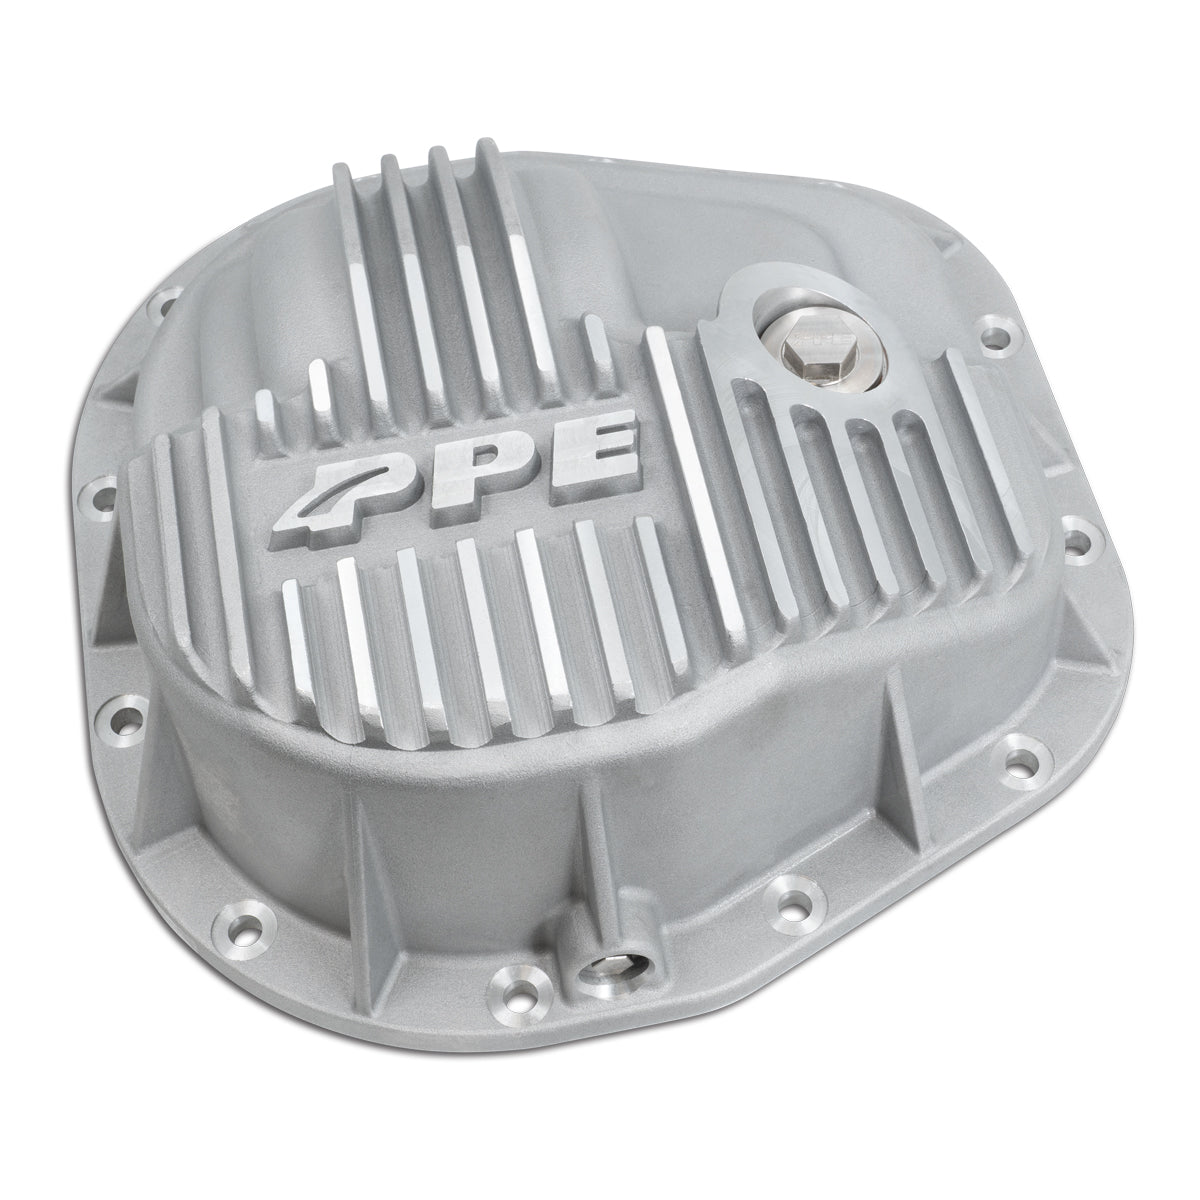 PPE Diesel Differential Cover Ford HD 10.25 Inch/10.5 Inch Curved Back Raw  338051100